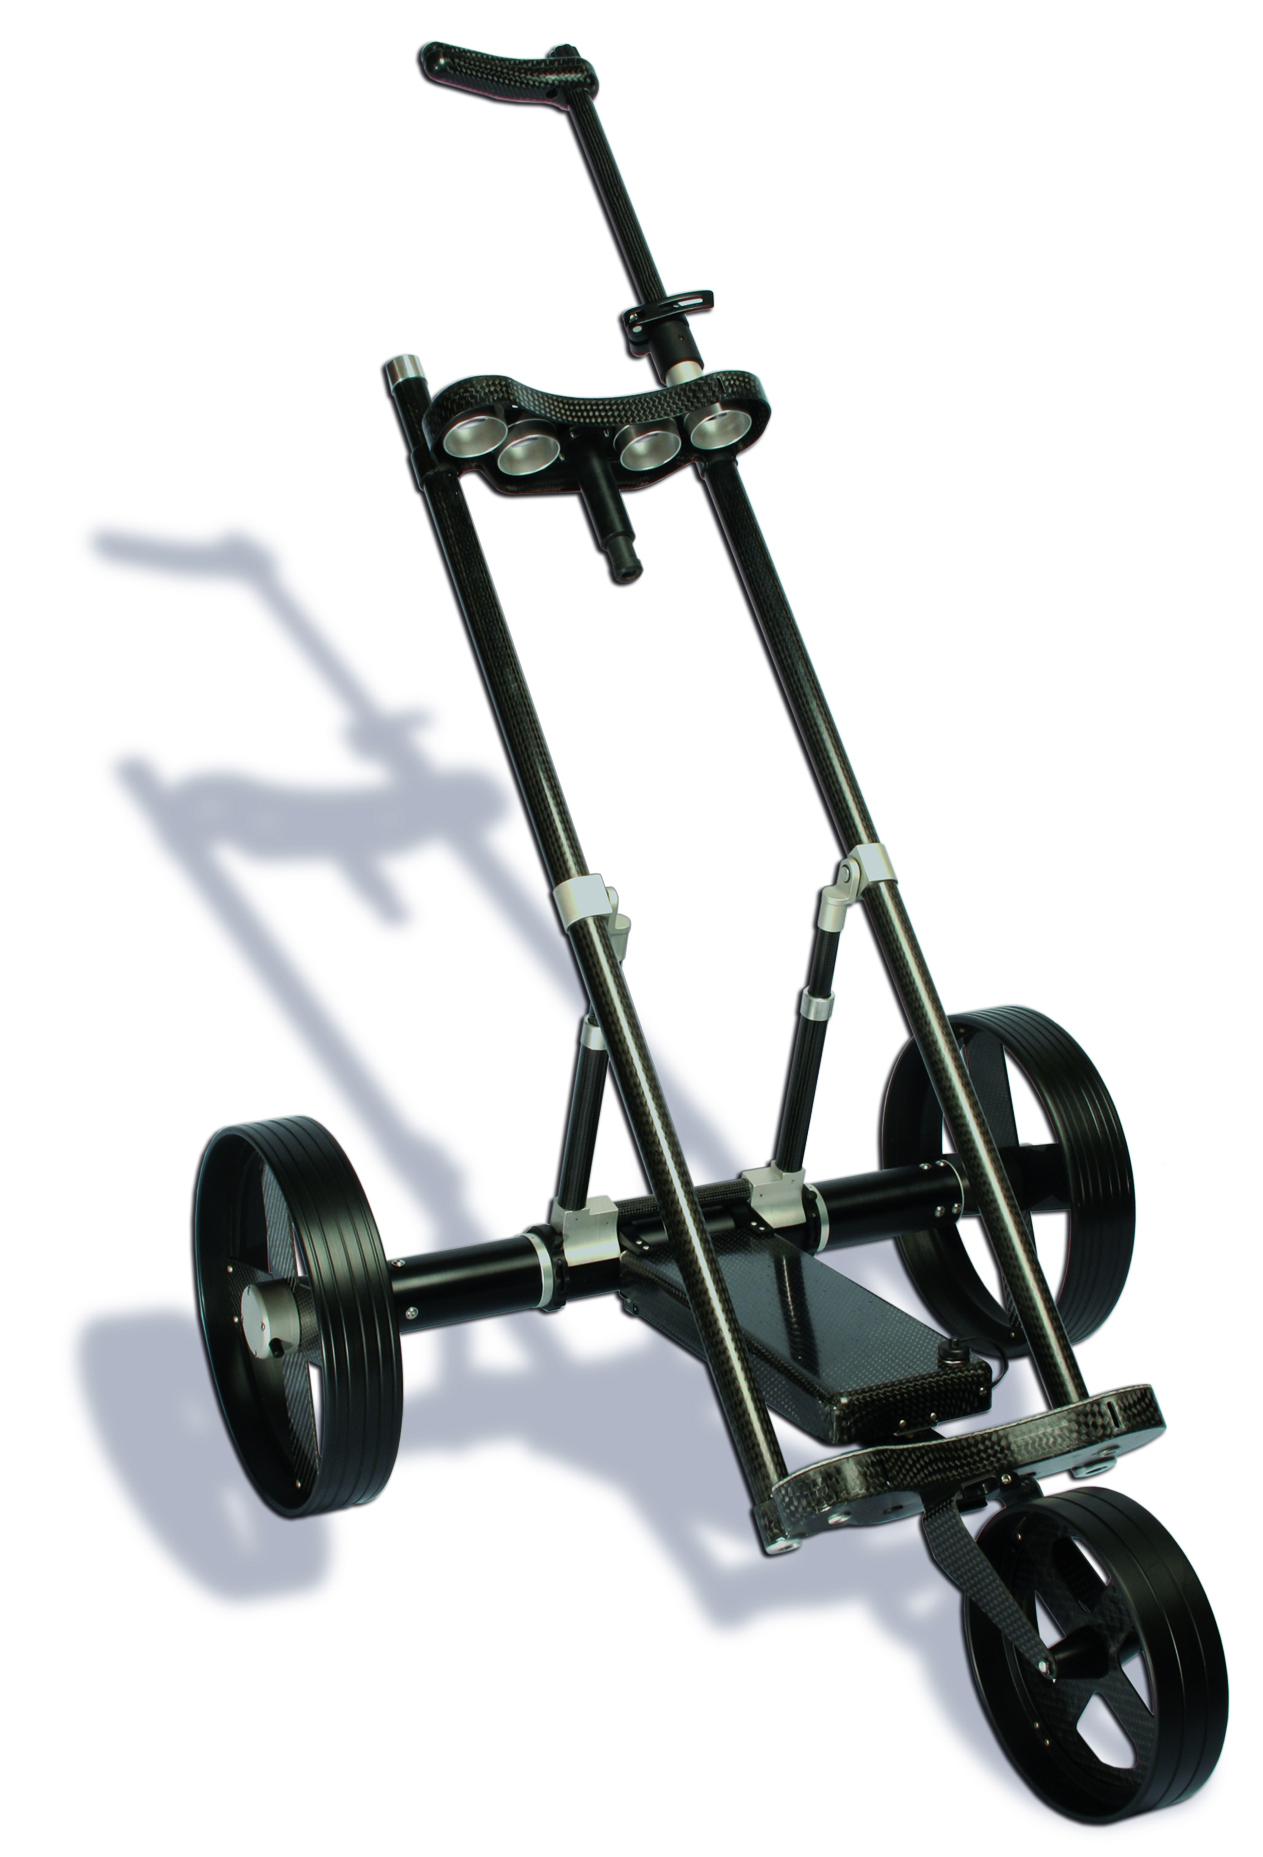  golf caddy with electric drive and carbon fibre structure